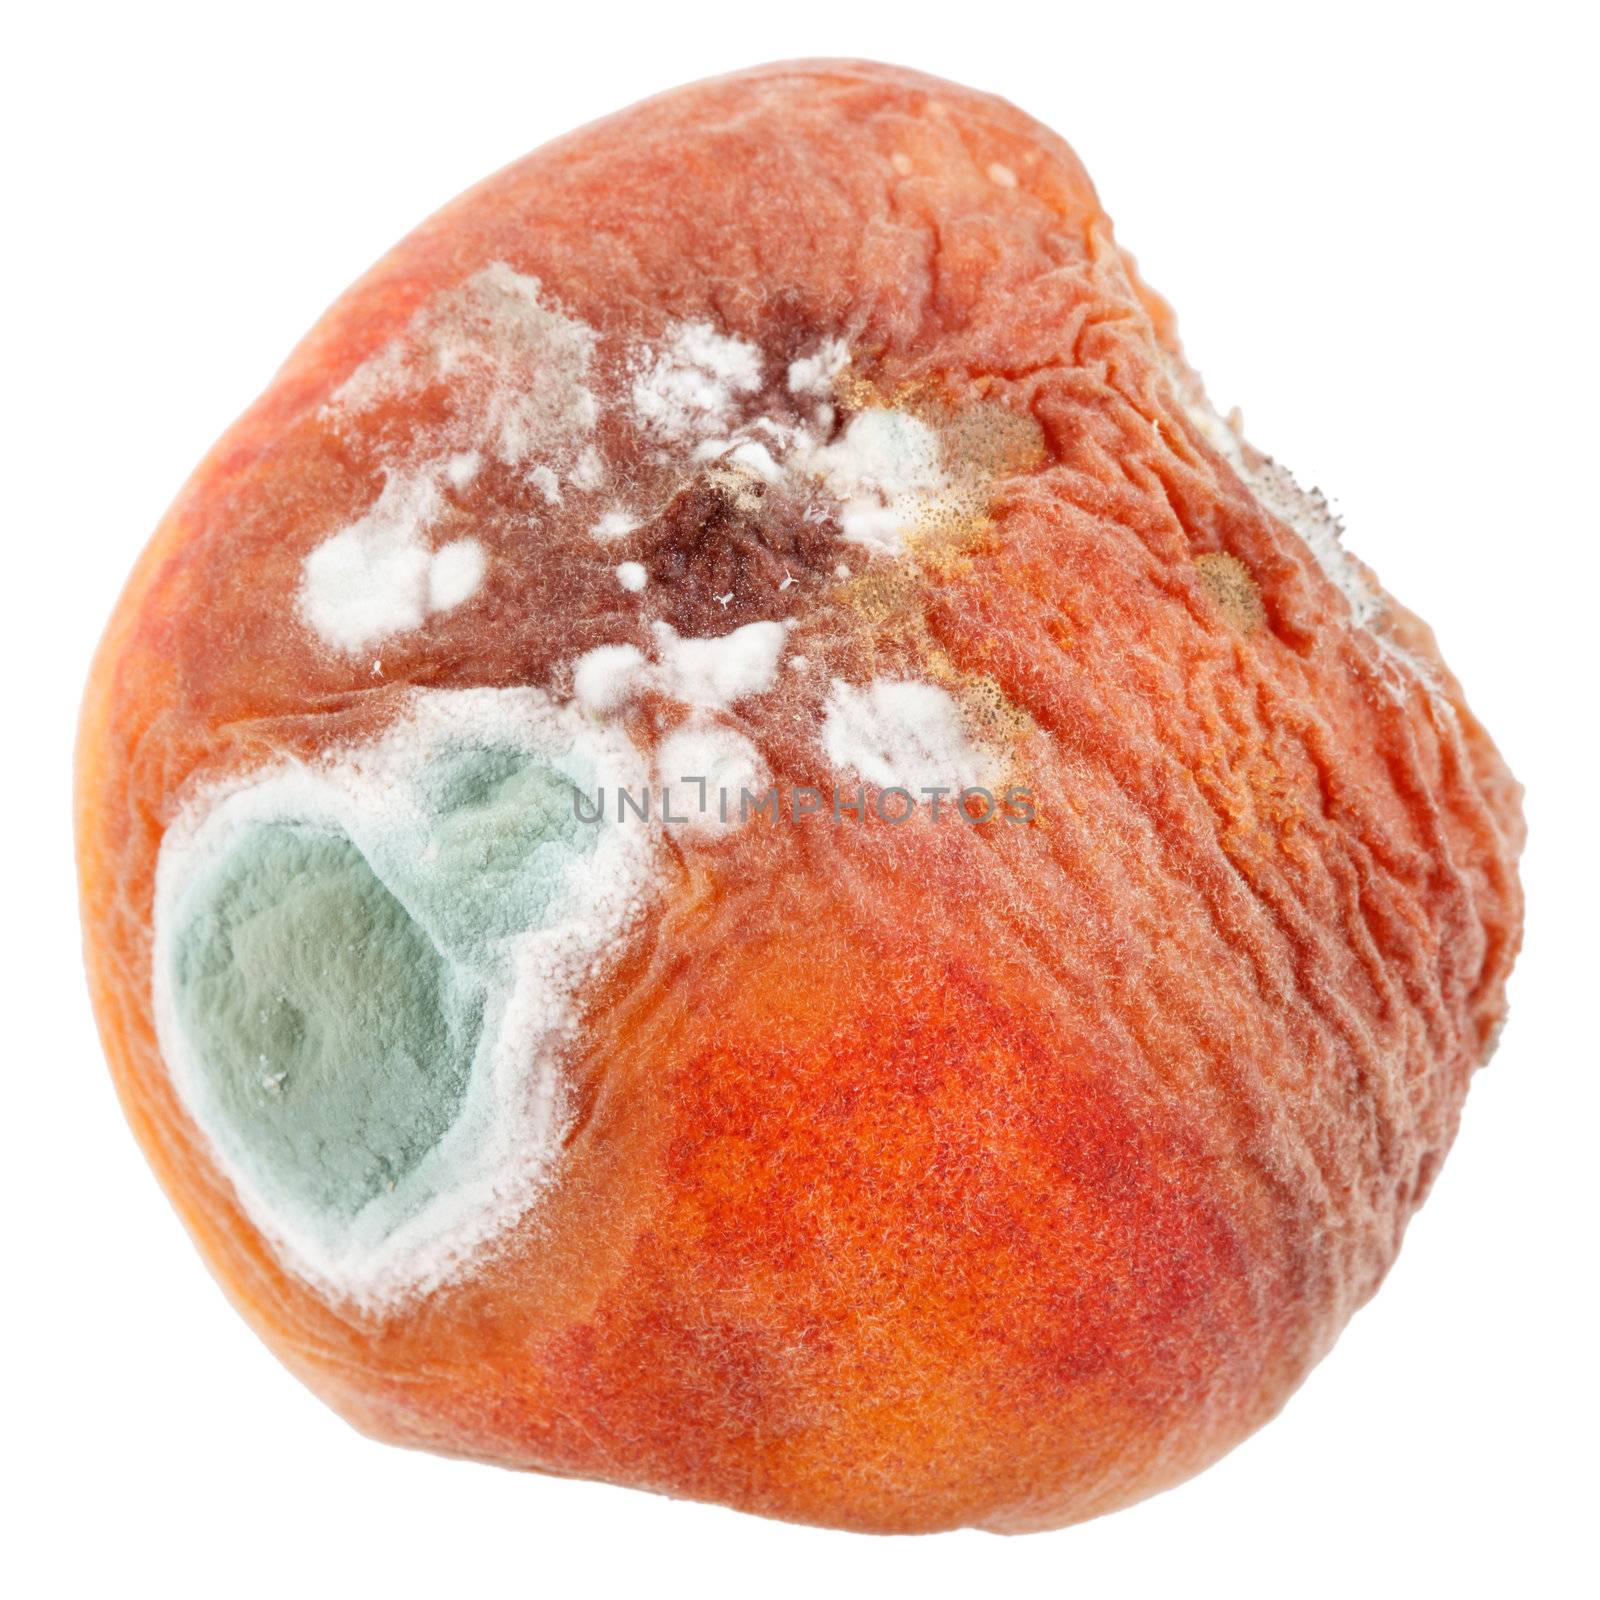 mould on peach  by shebeko